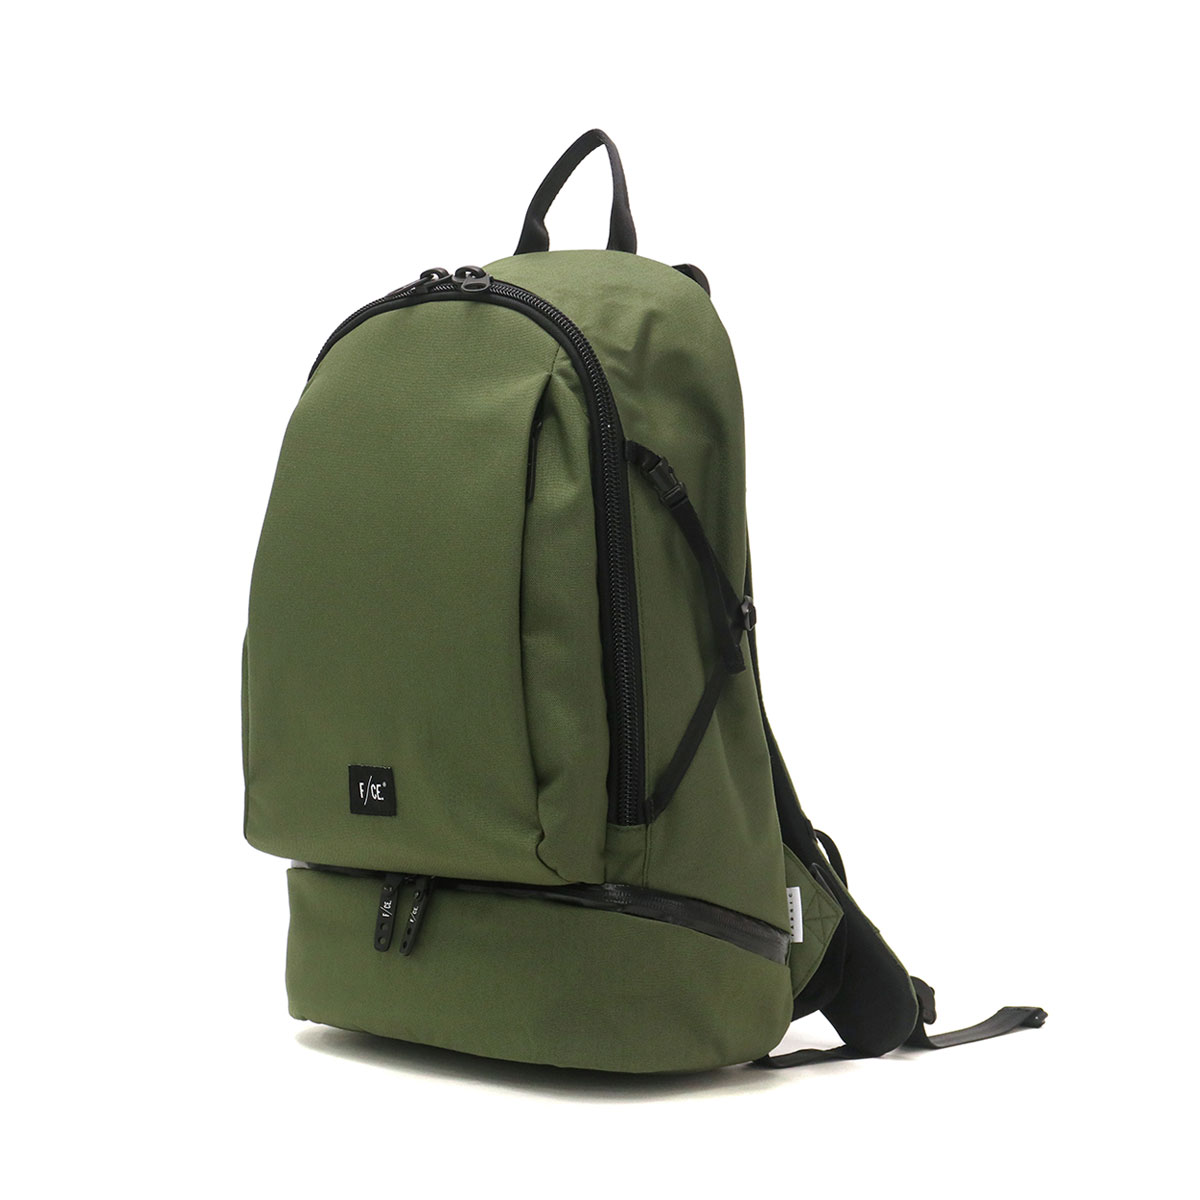 F/CE. エフシーイー PET RECYCLE PE ONE DAY SACK リュックサック 29L 